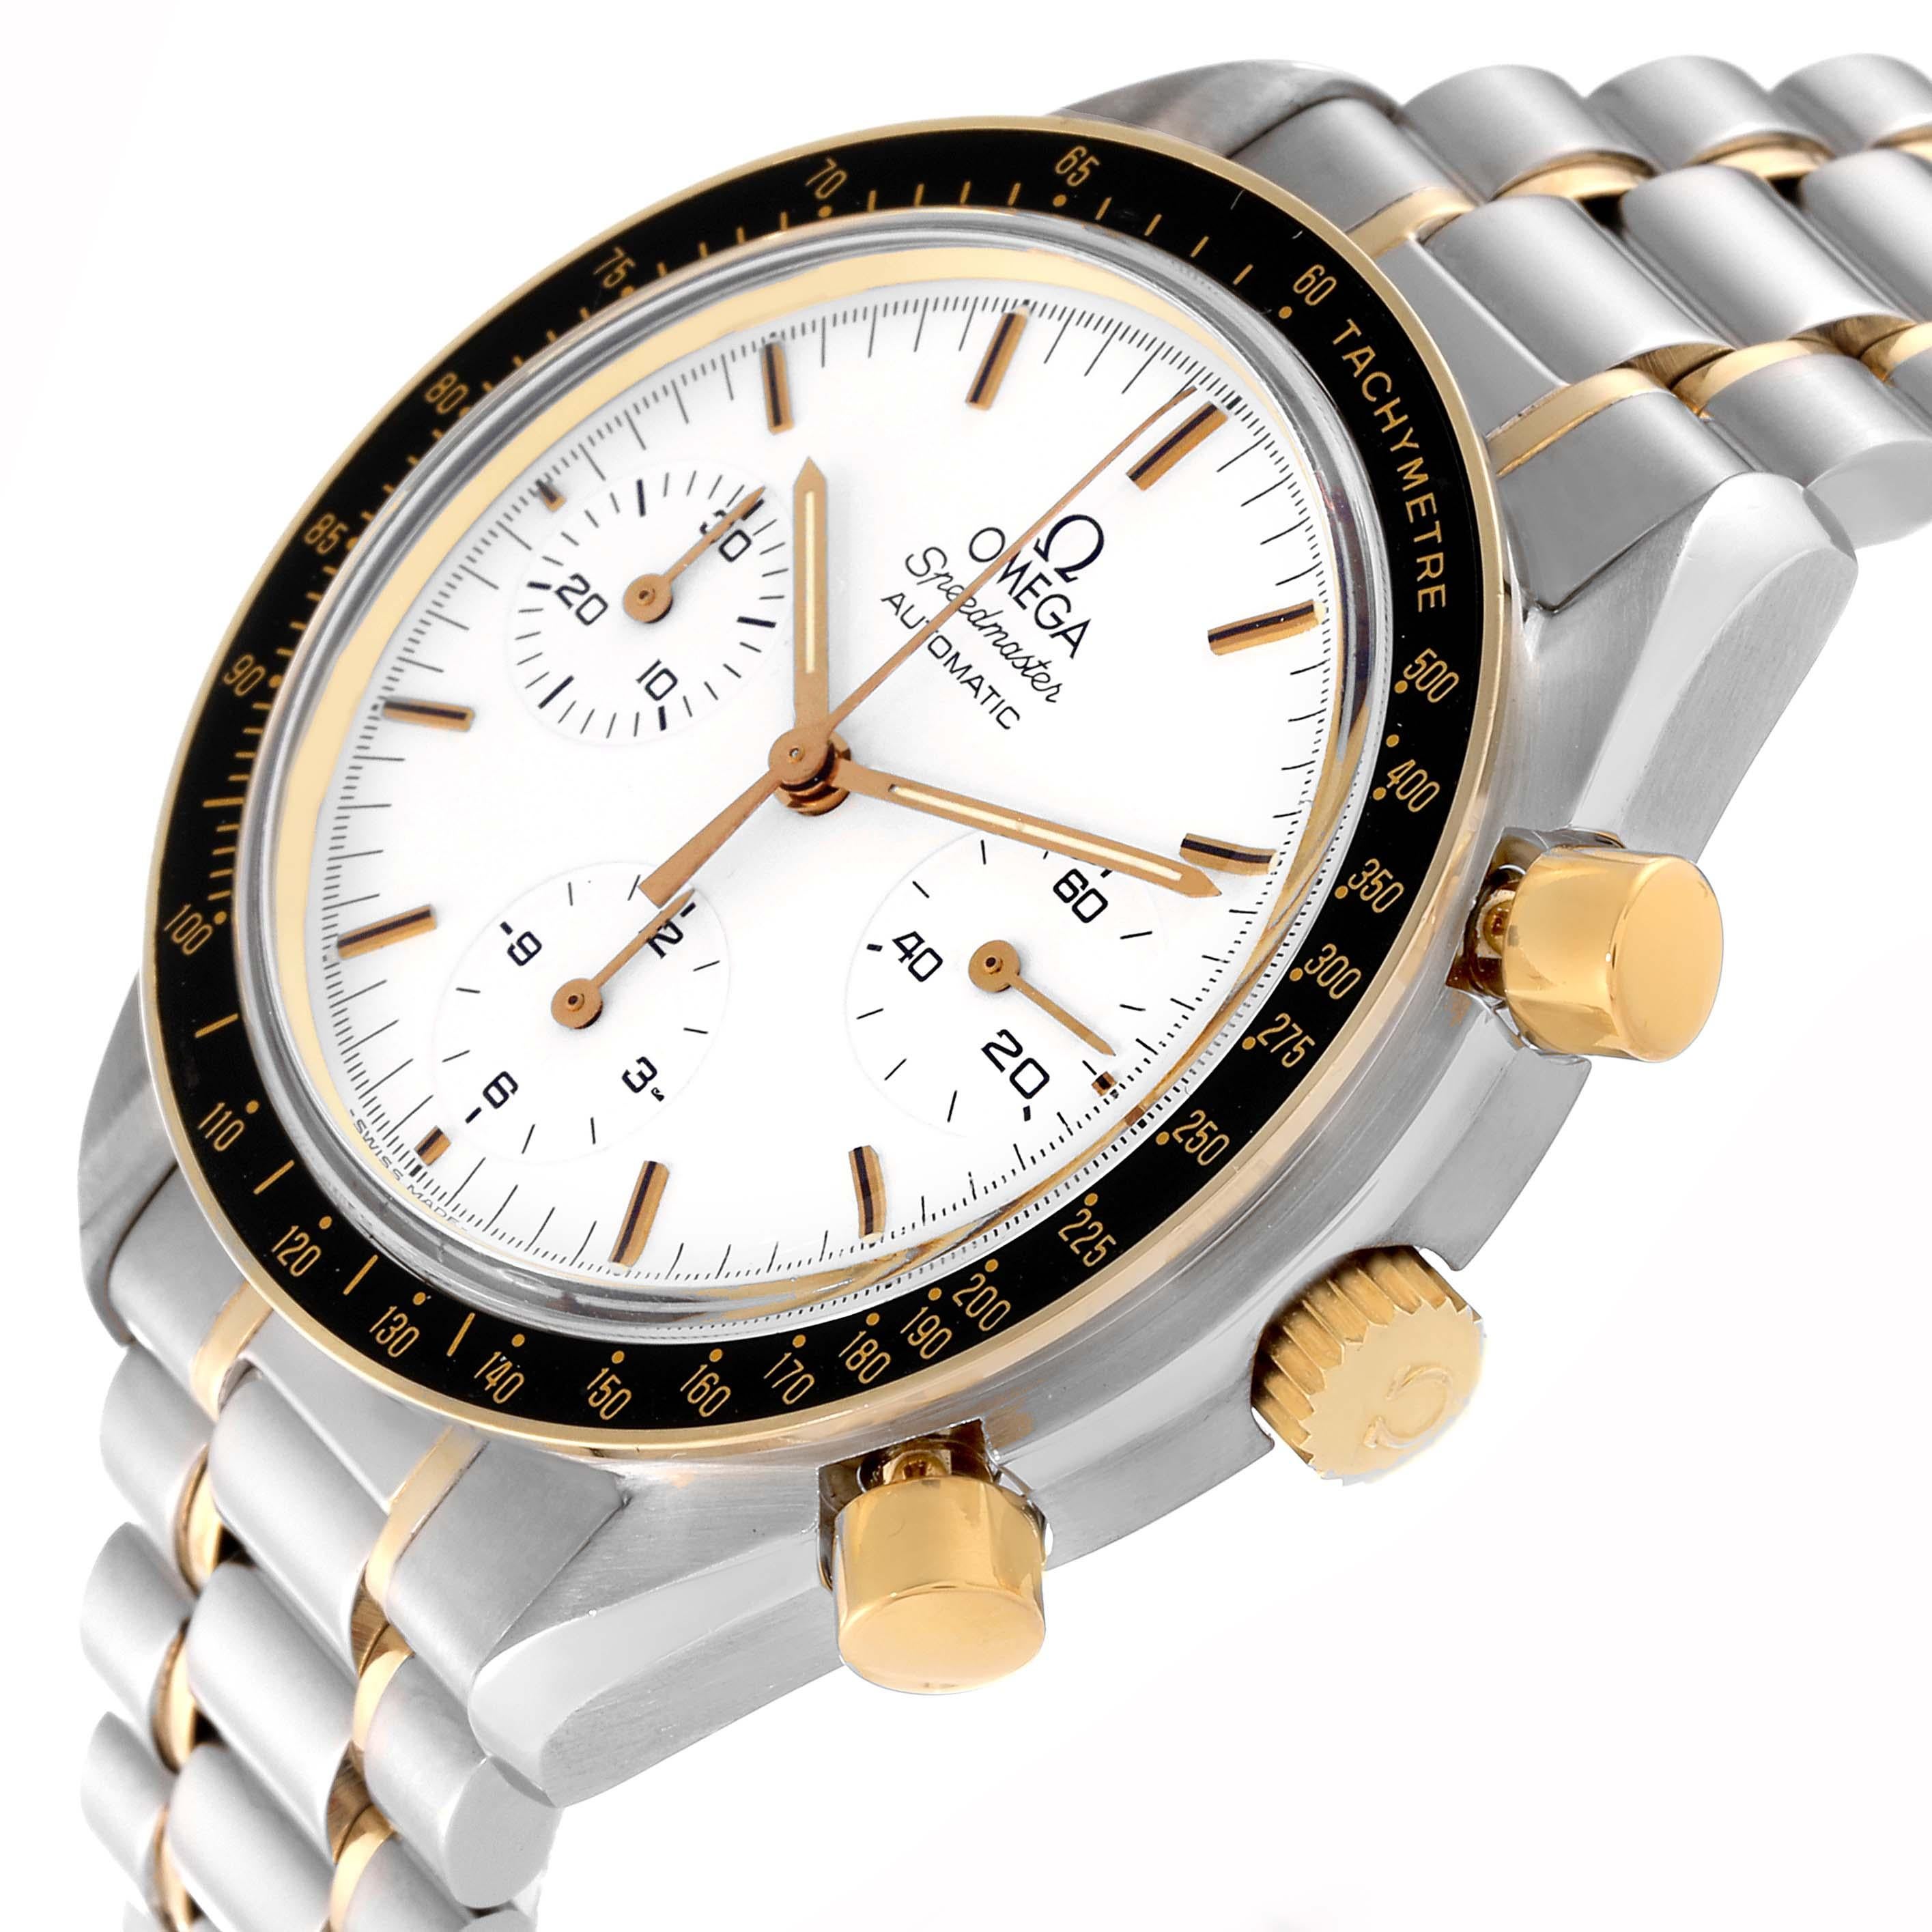 Omega Speedmaster Steel Yellow Gold Chronograph Mens Watch 3310.20.00 Papers en vente 4